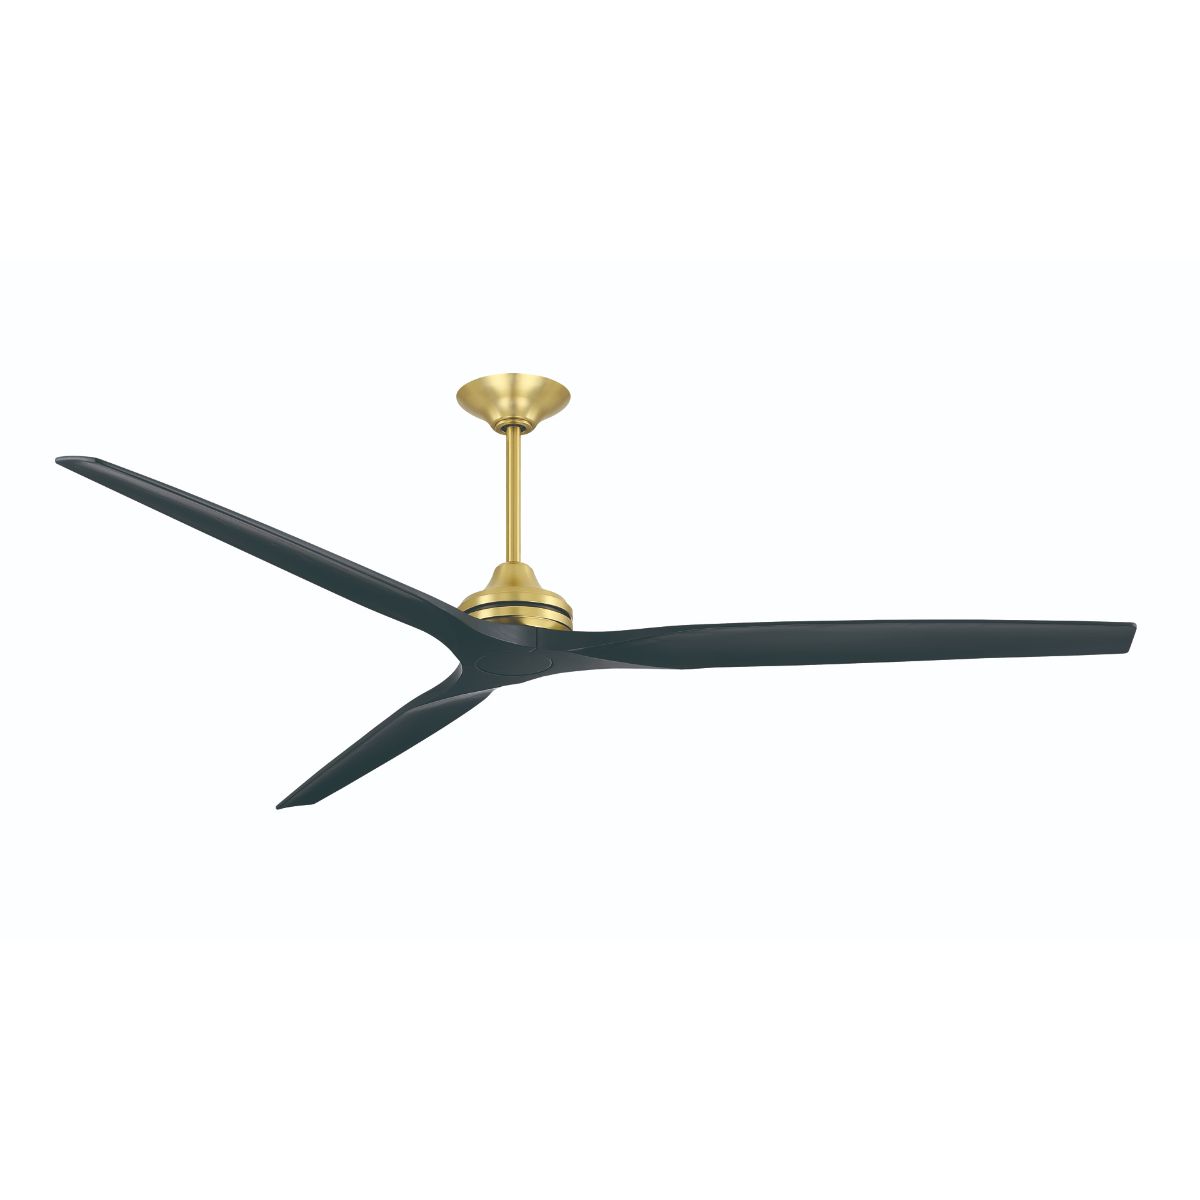 Spitfire DC Outdoor Ceiling Fan Motor With Remote, Brushed Satin Brass Finish, Set of 3 Blades Sold Separately